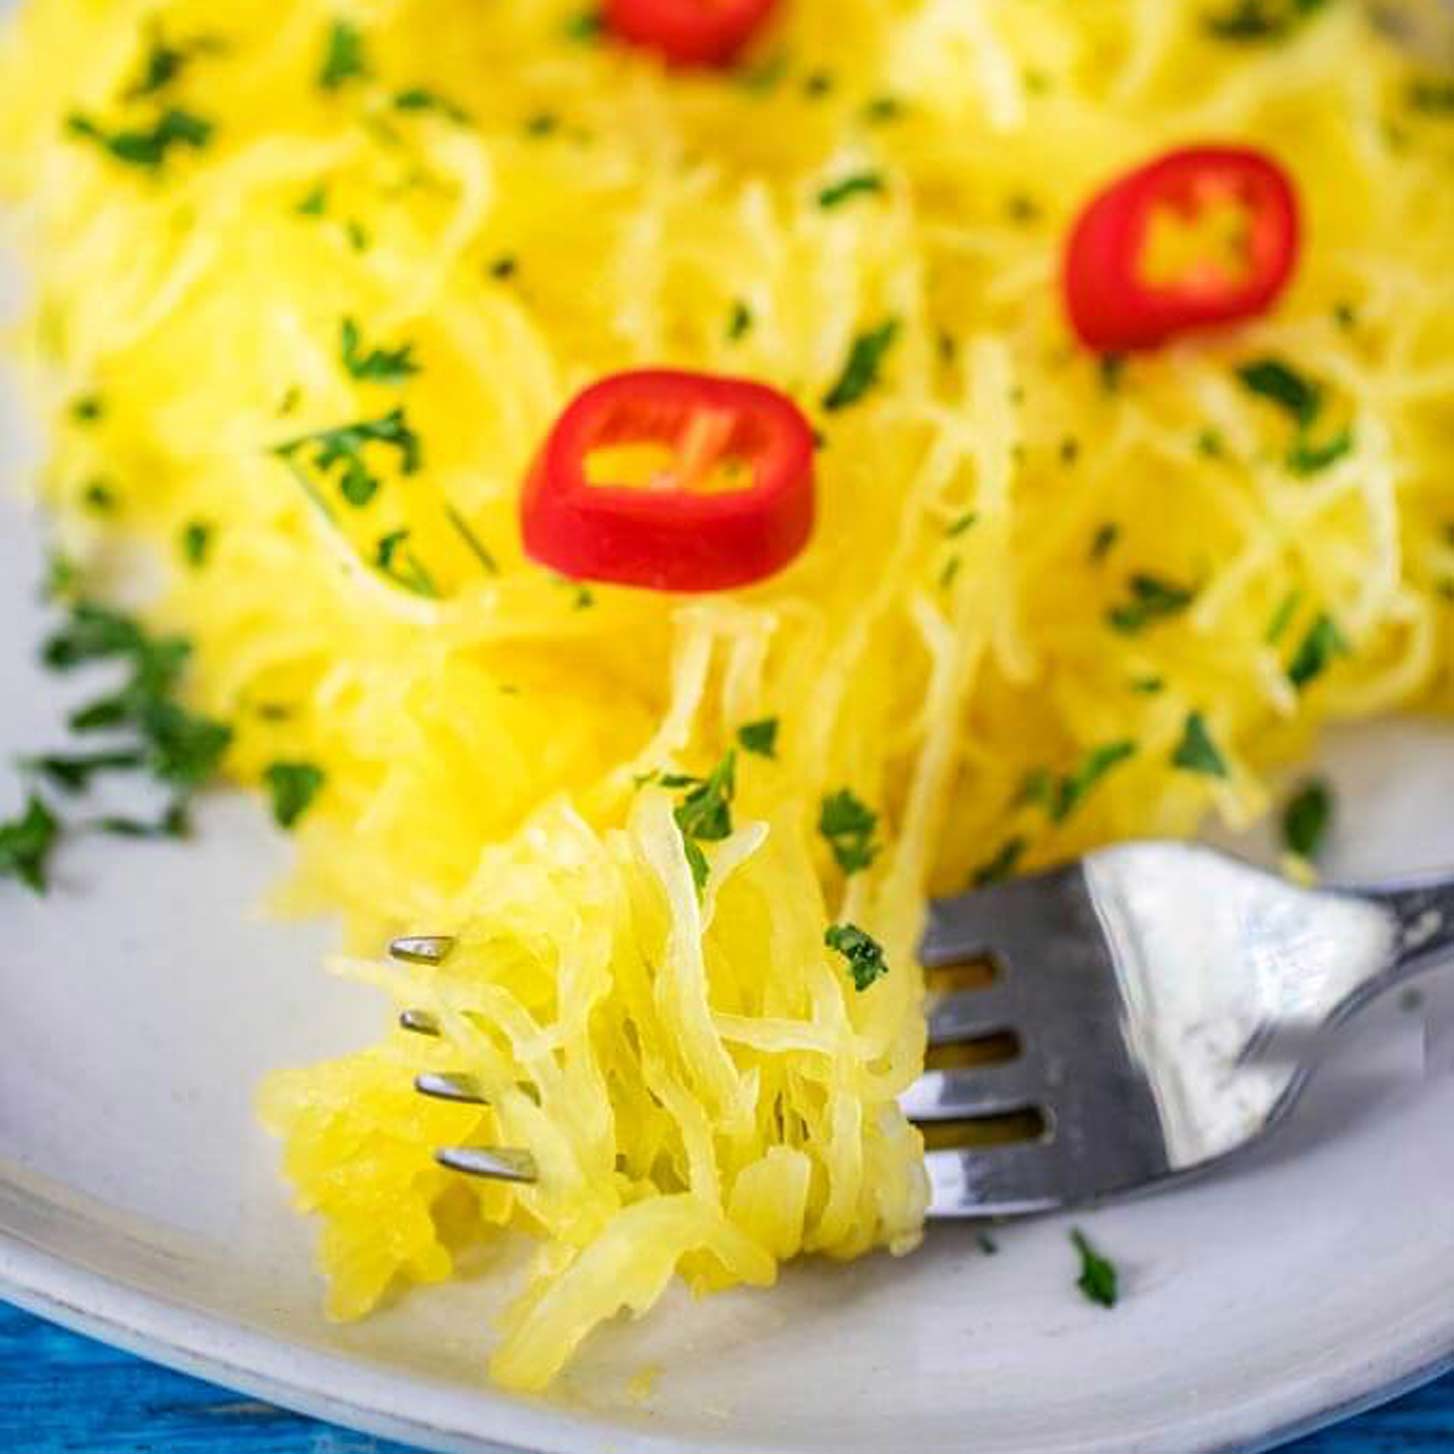 Close up square photo of Instant Pot Spaghetti Squash on a fork, garnished with hot peppers and parsley.